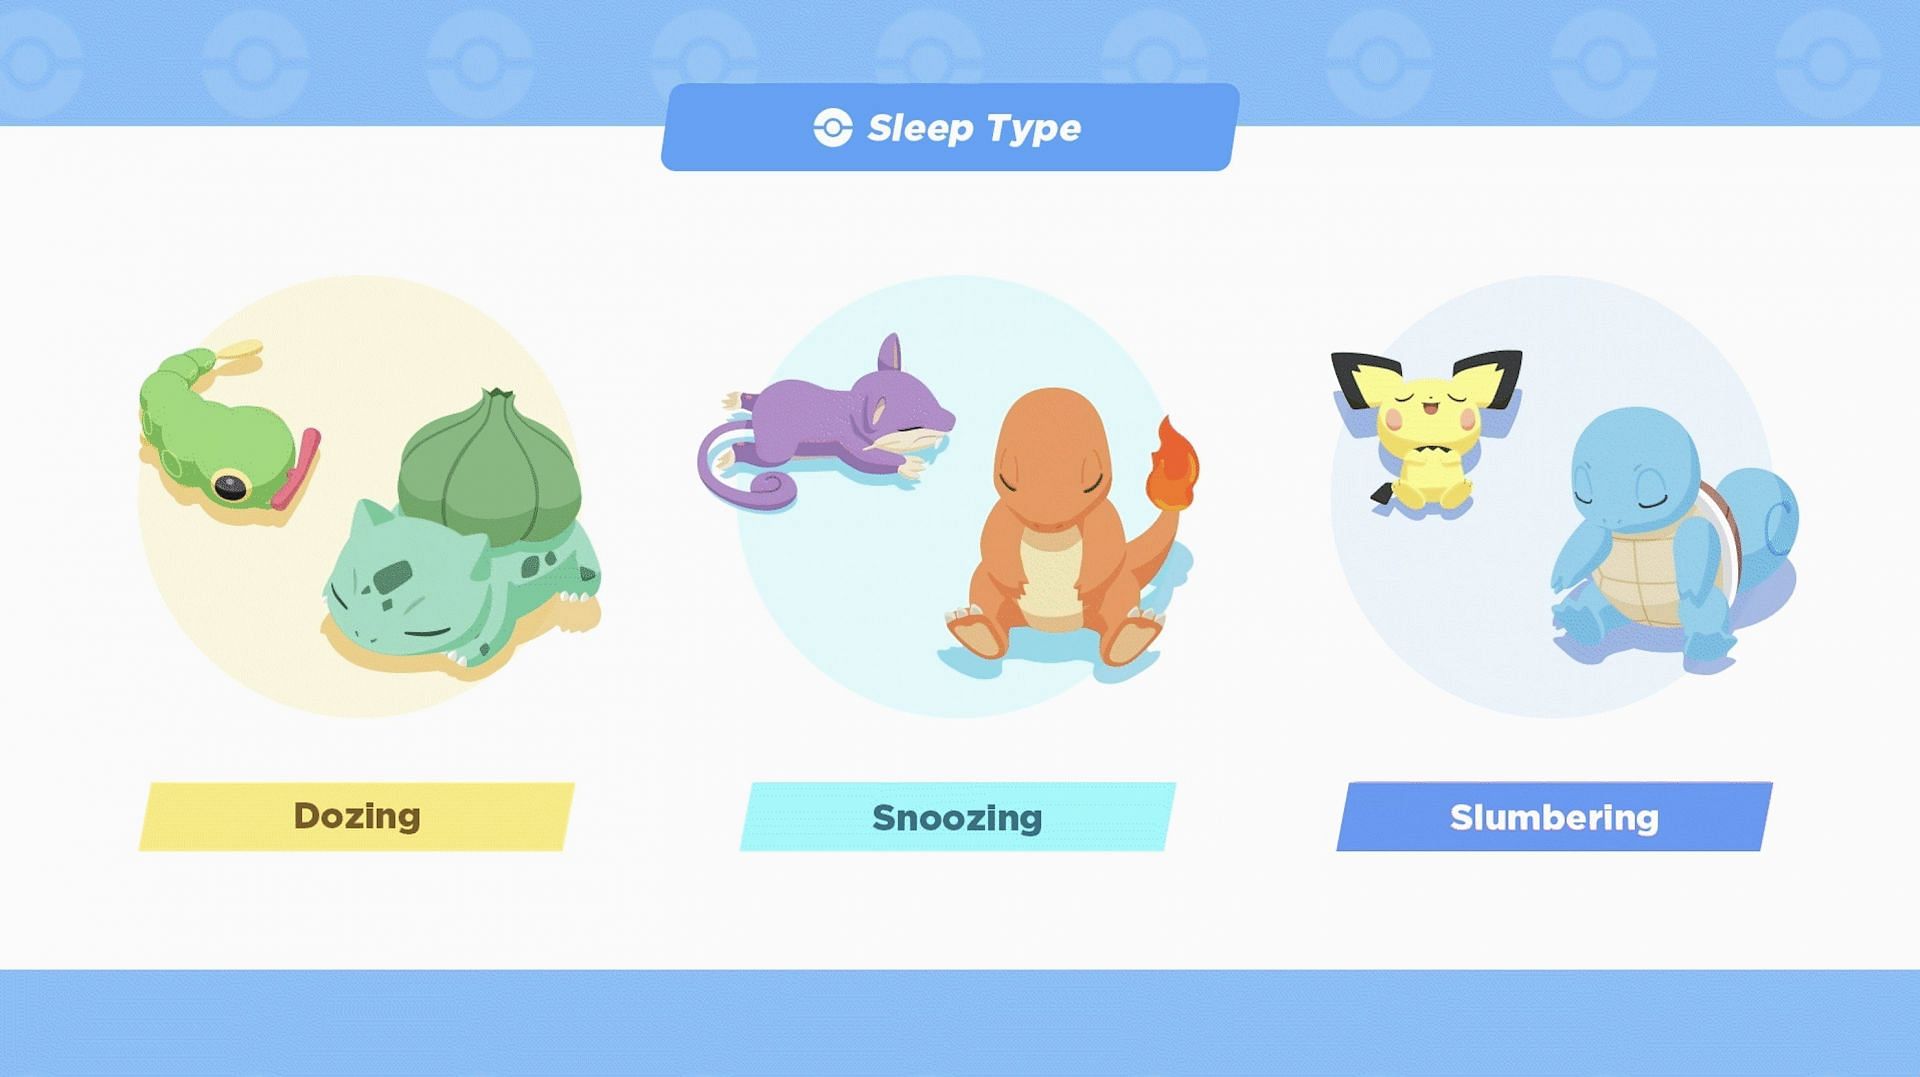 Types of Sleep in the game (Image via The Pokemon Company)